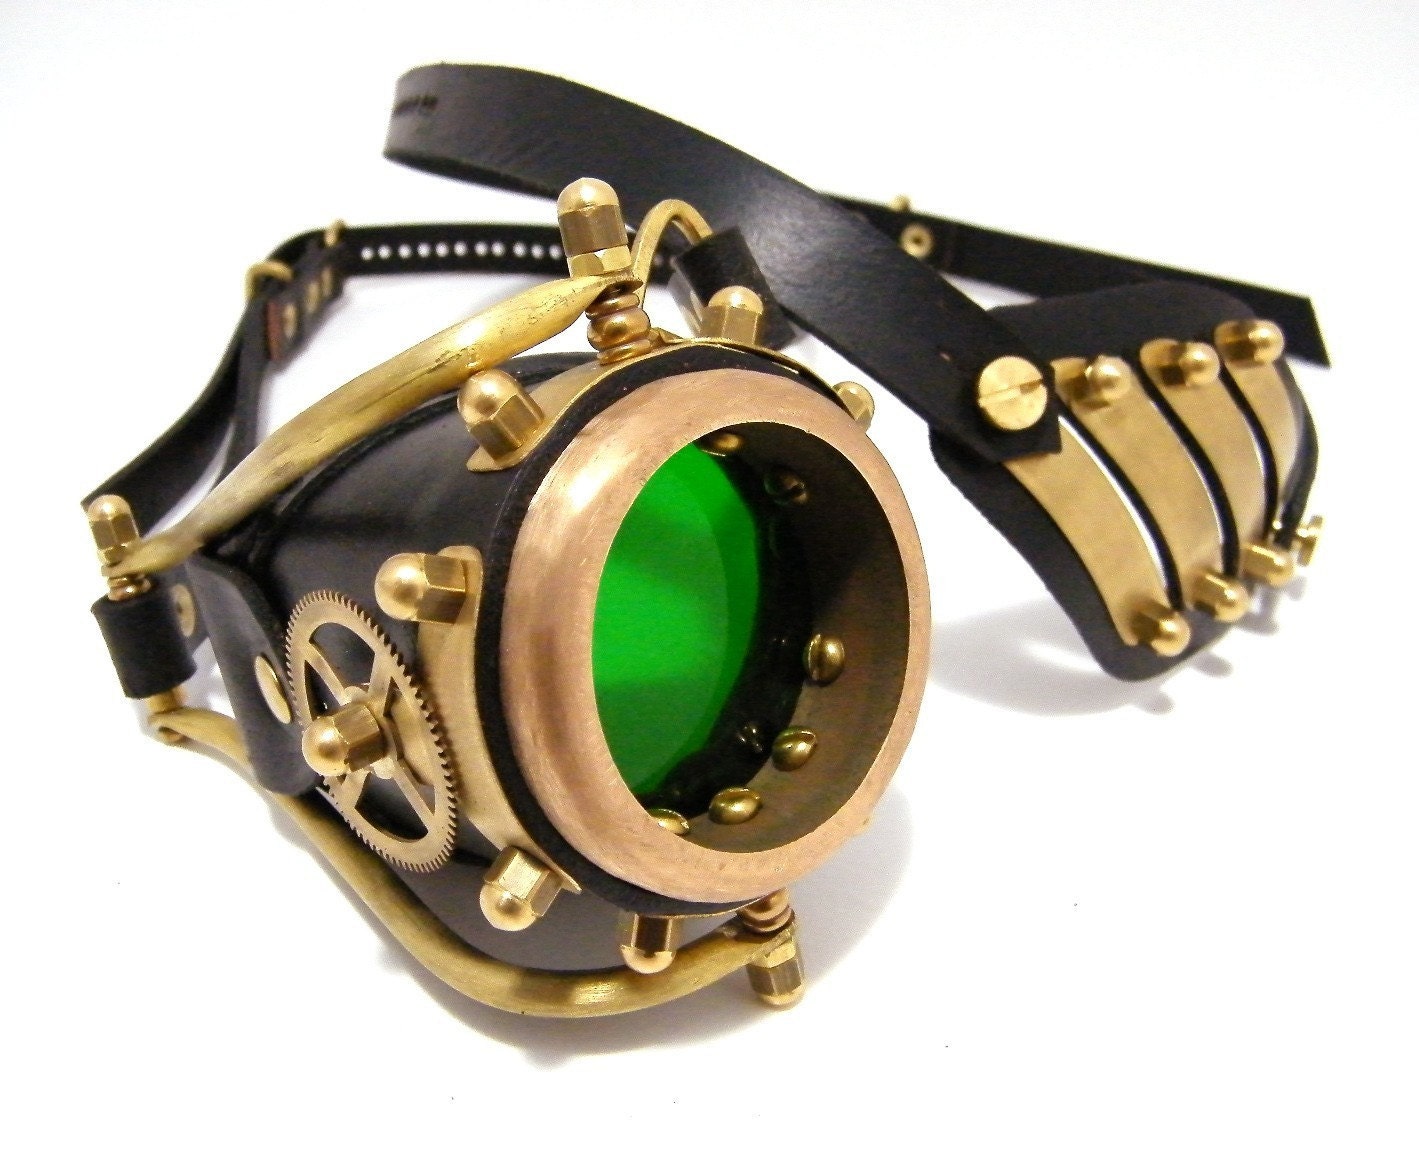 Steampunk solid brass monogoggle with leather eyepatch